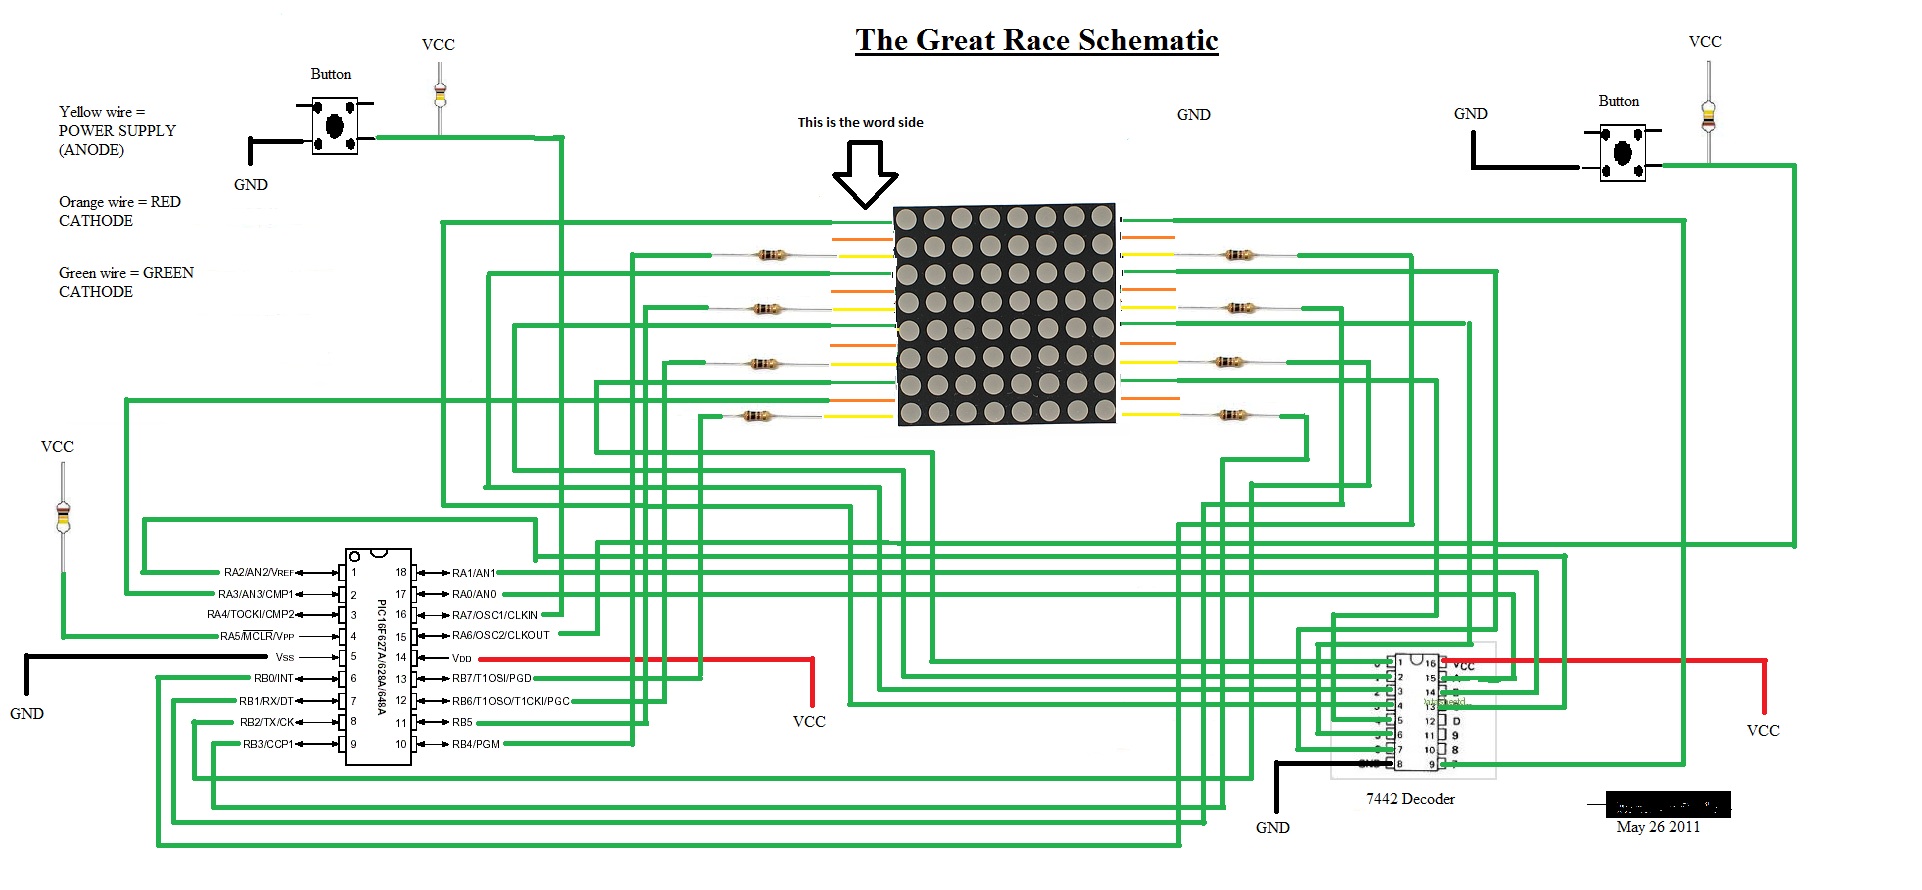 The Great Race Schematic.jpg